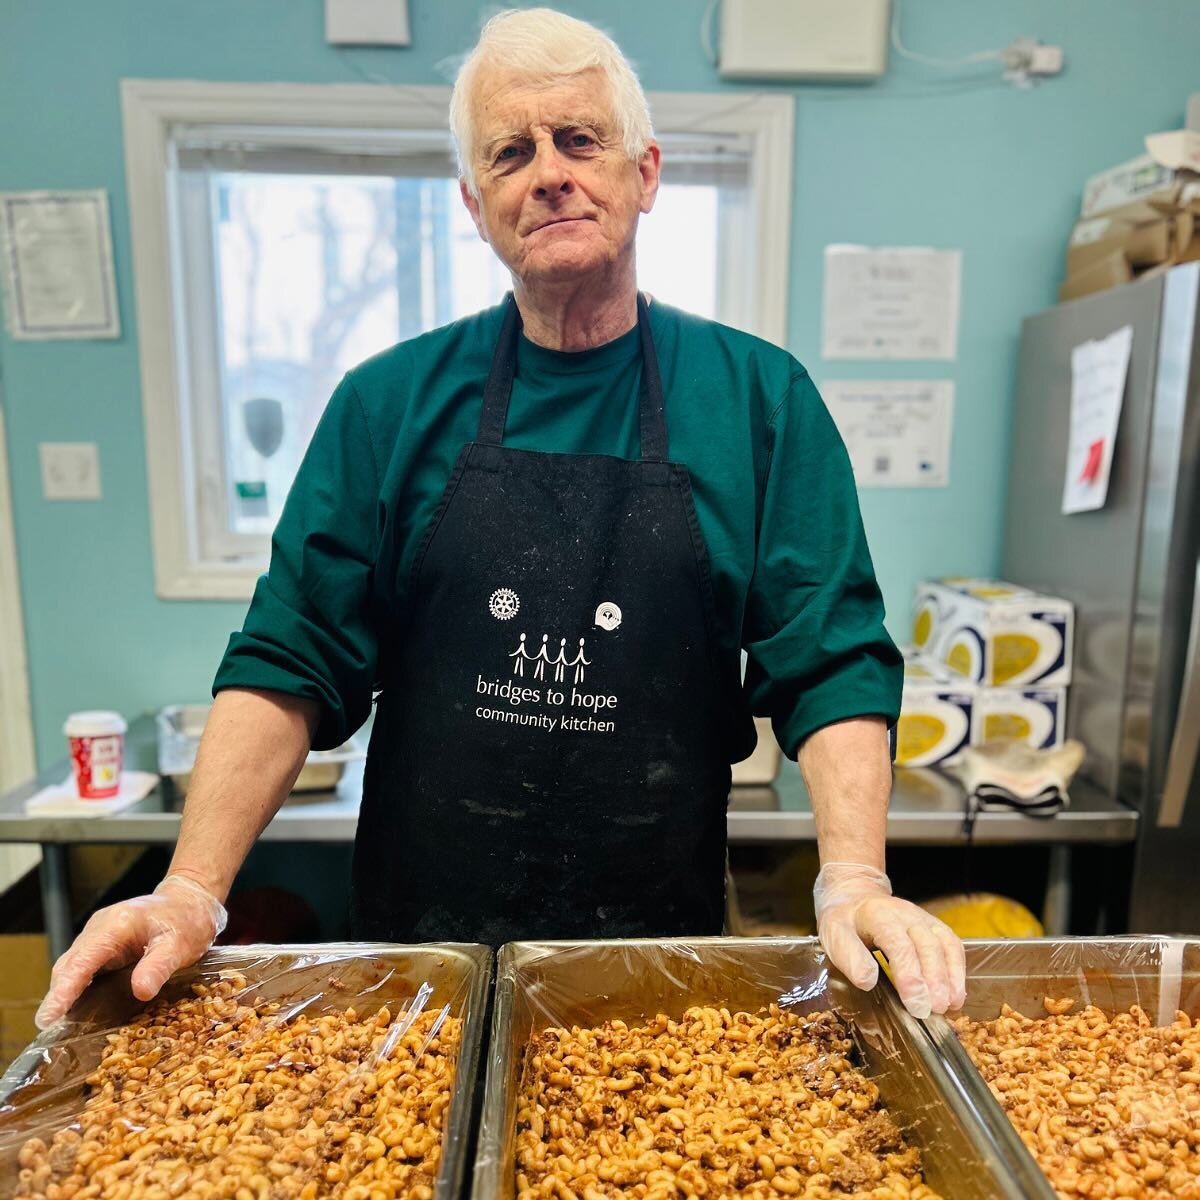 Volunteer Spotlight: Steve!

This is Steve, but not just any Steve! This amazing guy is a volunteer extraordinaire at Bridges To Hope, and has been for a whopping 8 years! 

Every single week, Steve works his magic in the kitchen, whipping up delicio